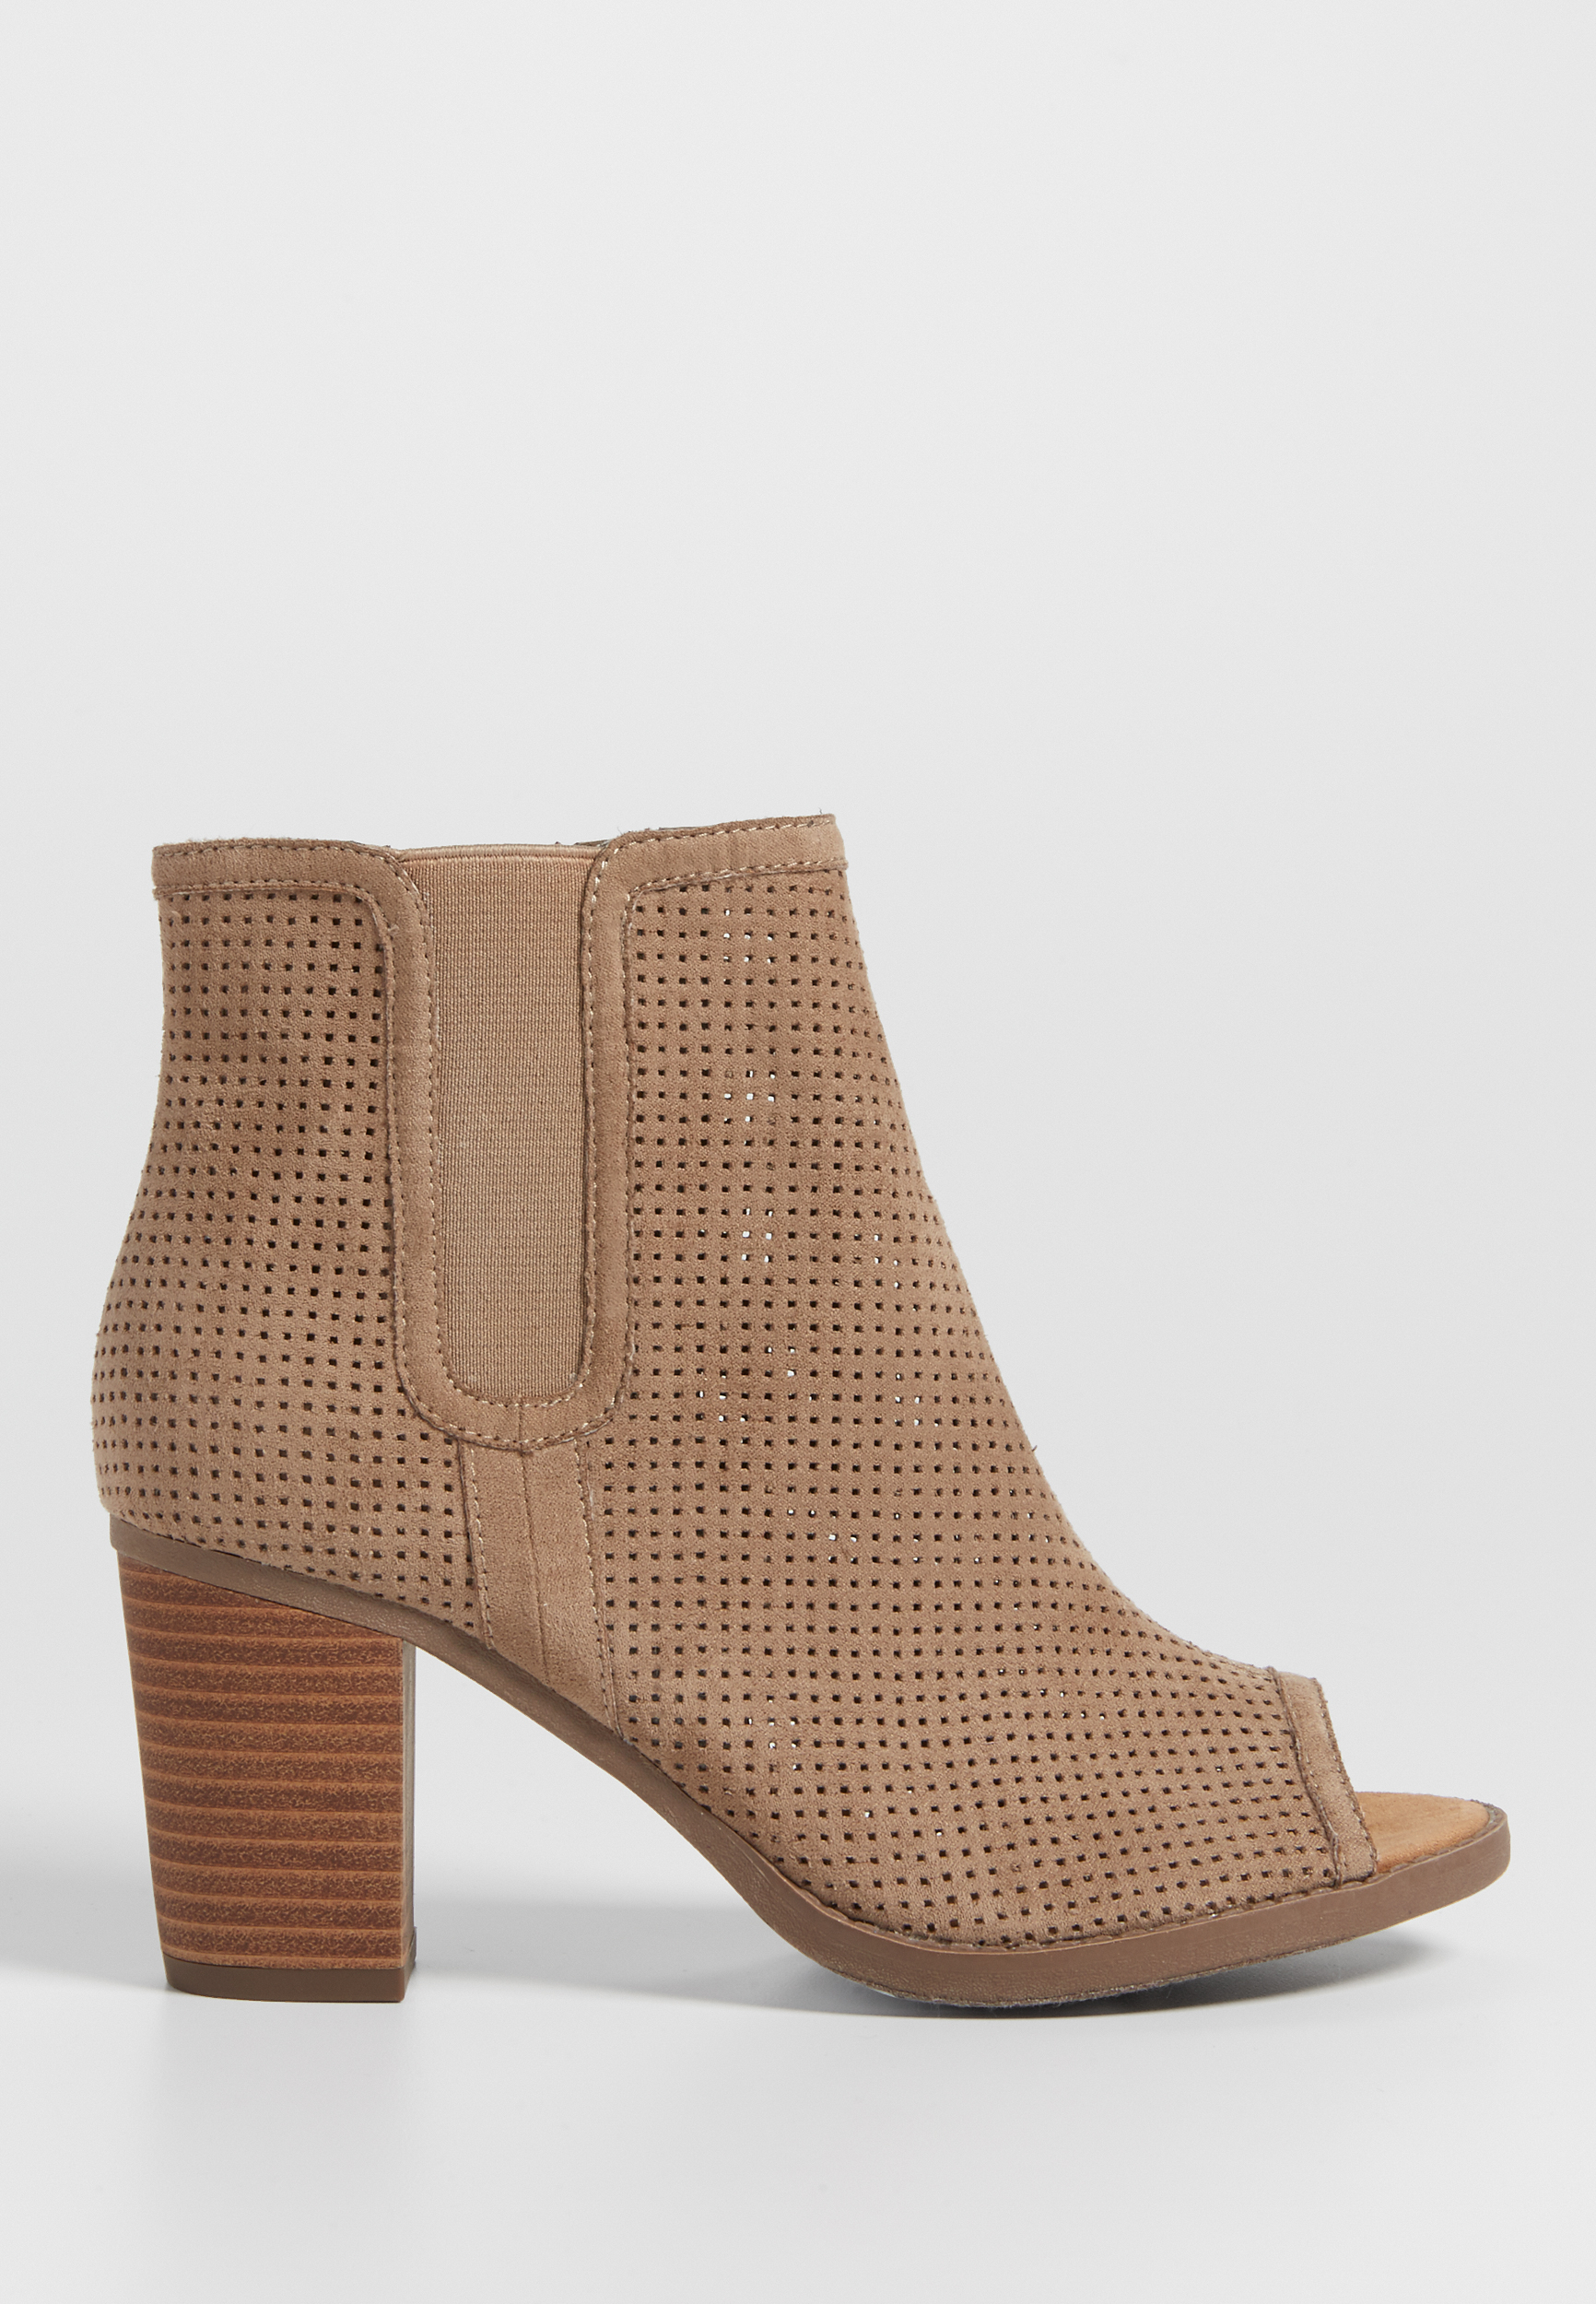 RTV - Ginger perforated faux suede bootie with peep toe in taupe | maurices